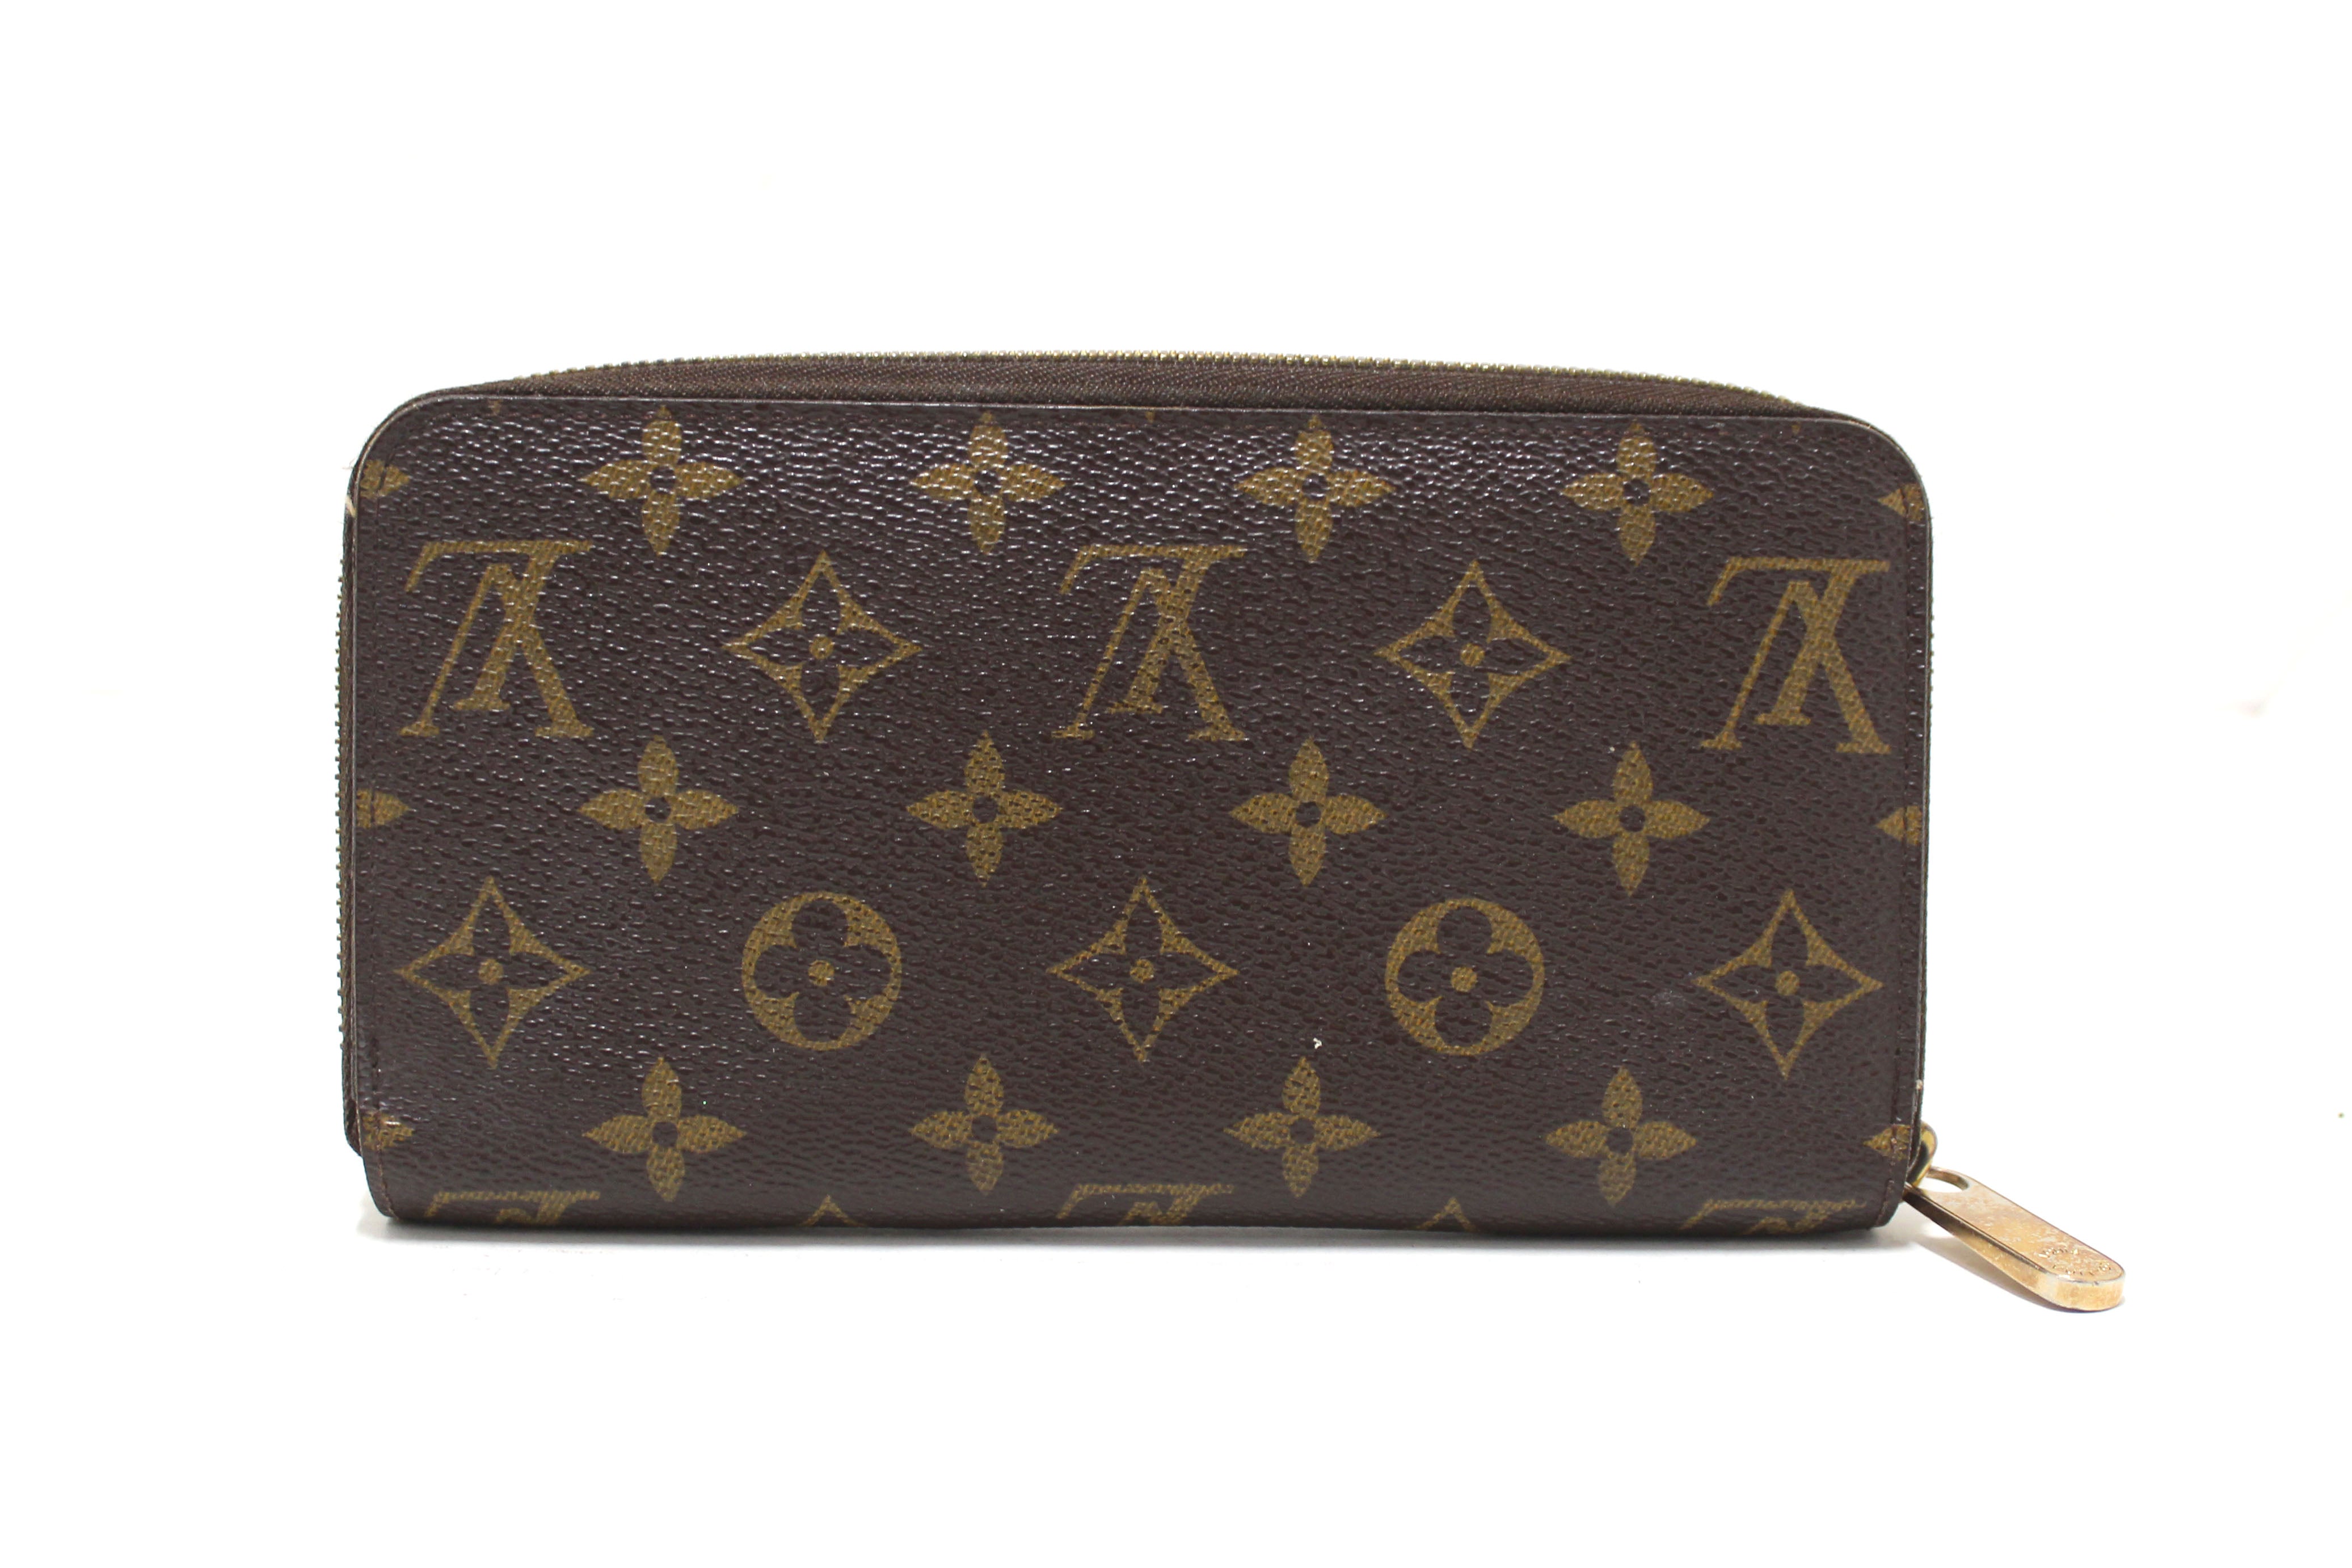 Louis Vuitton - Authenticated Zippy Wallet - Leather Brown Plain for Women, Very Good Condition